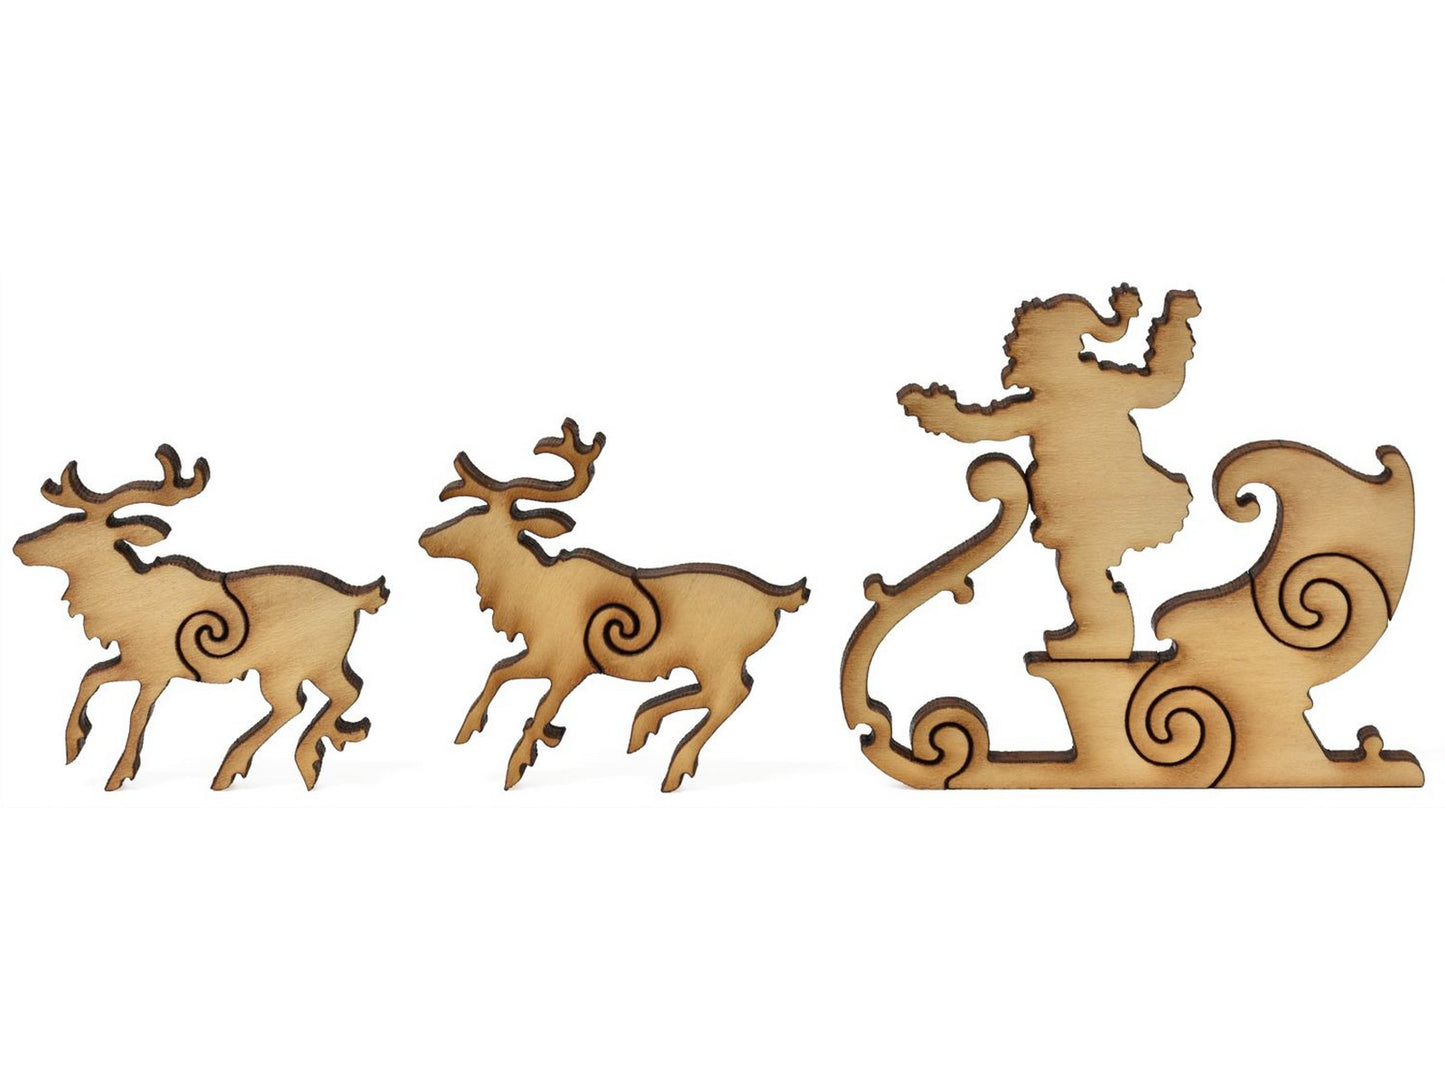 A closeup of pieces showing Santa in his sleigh with reindeer.